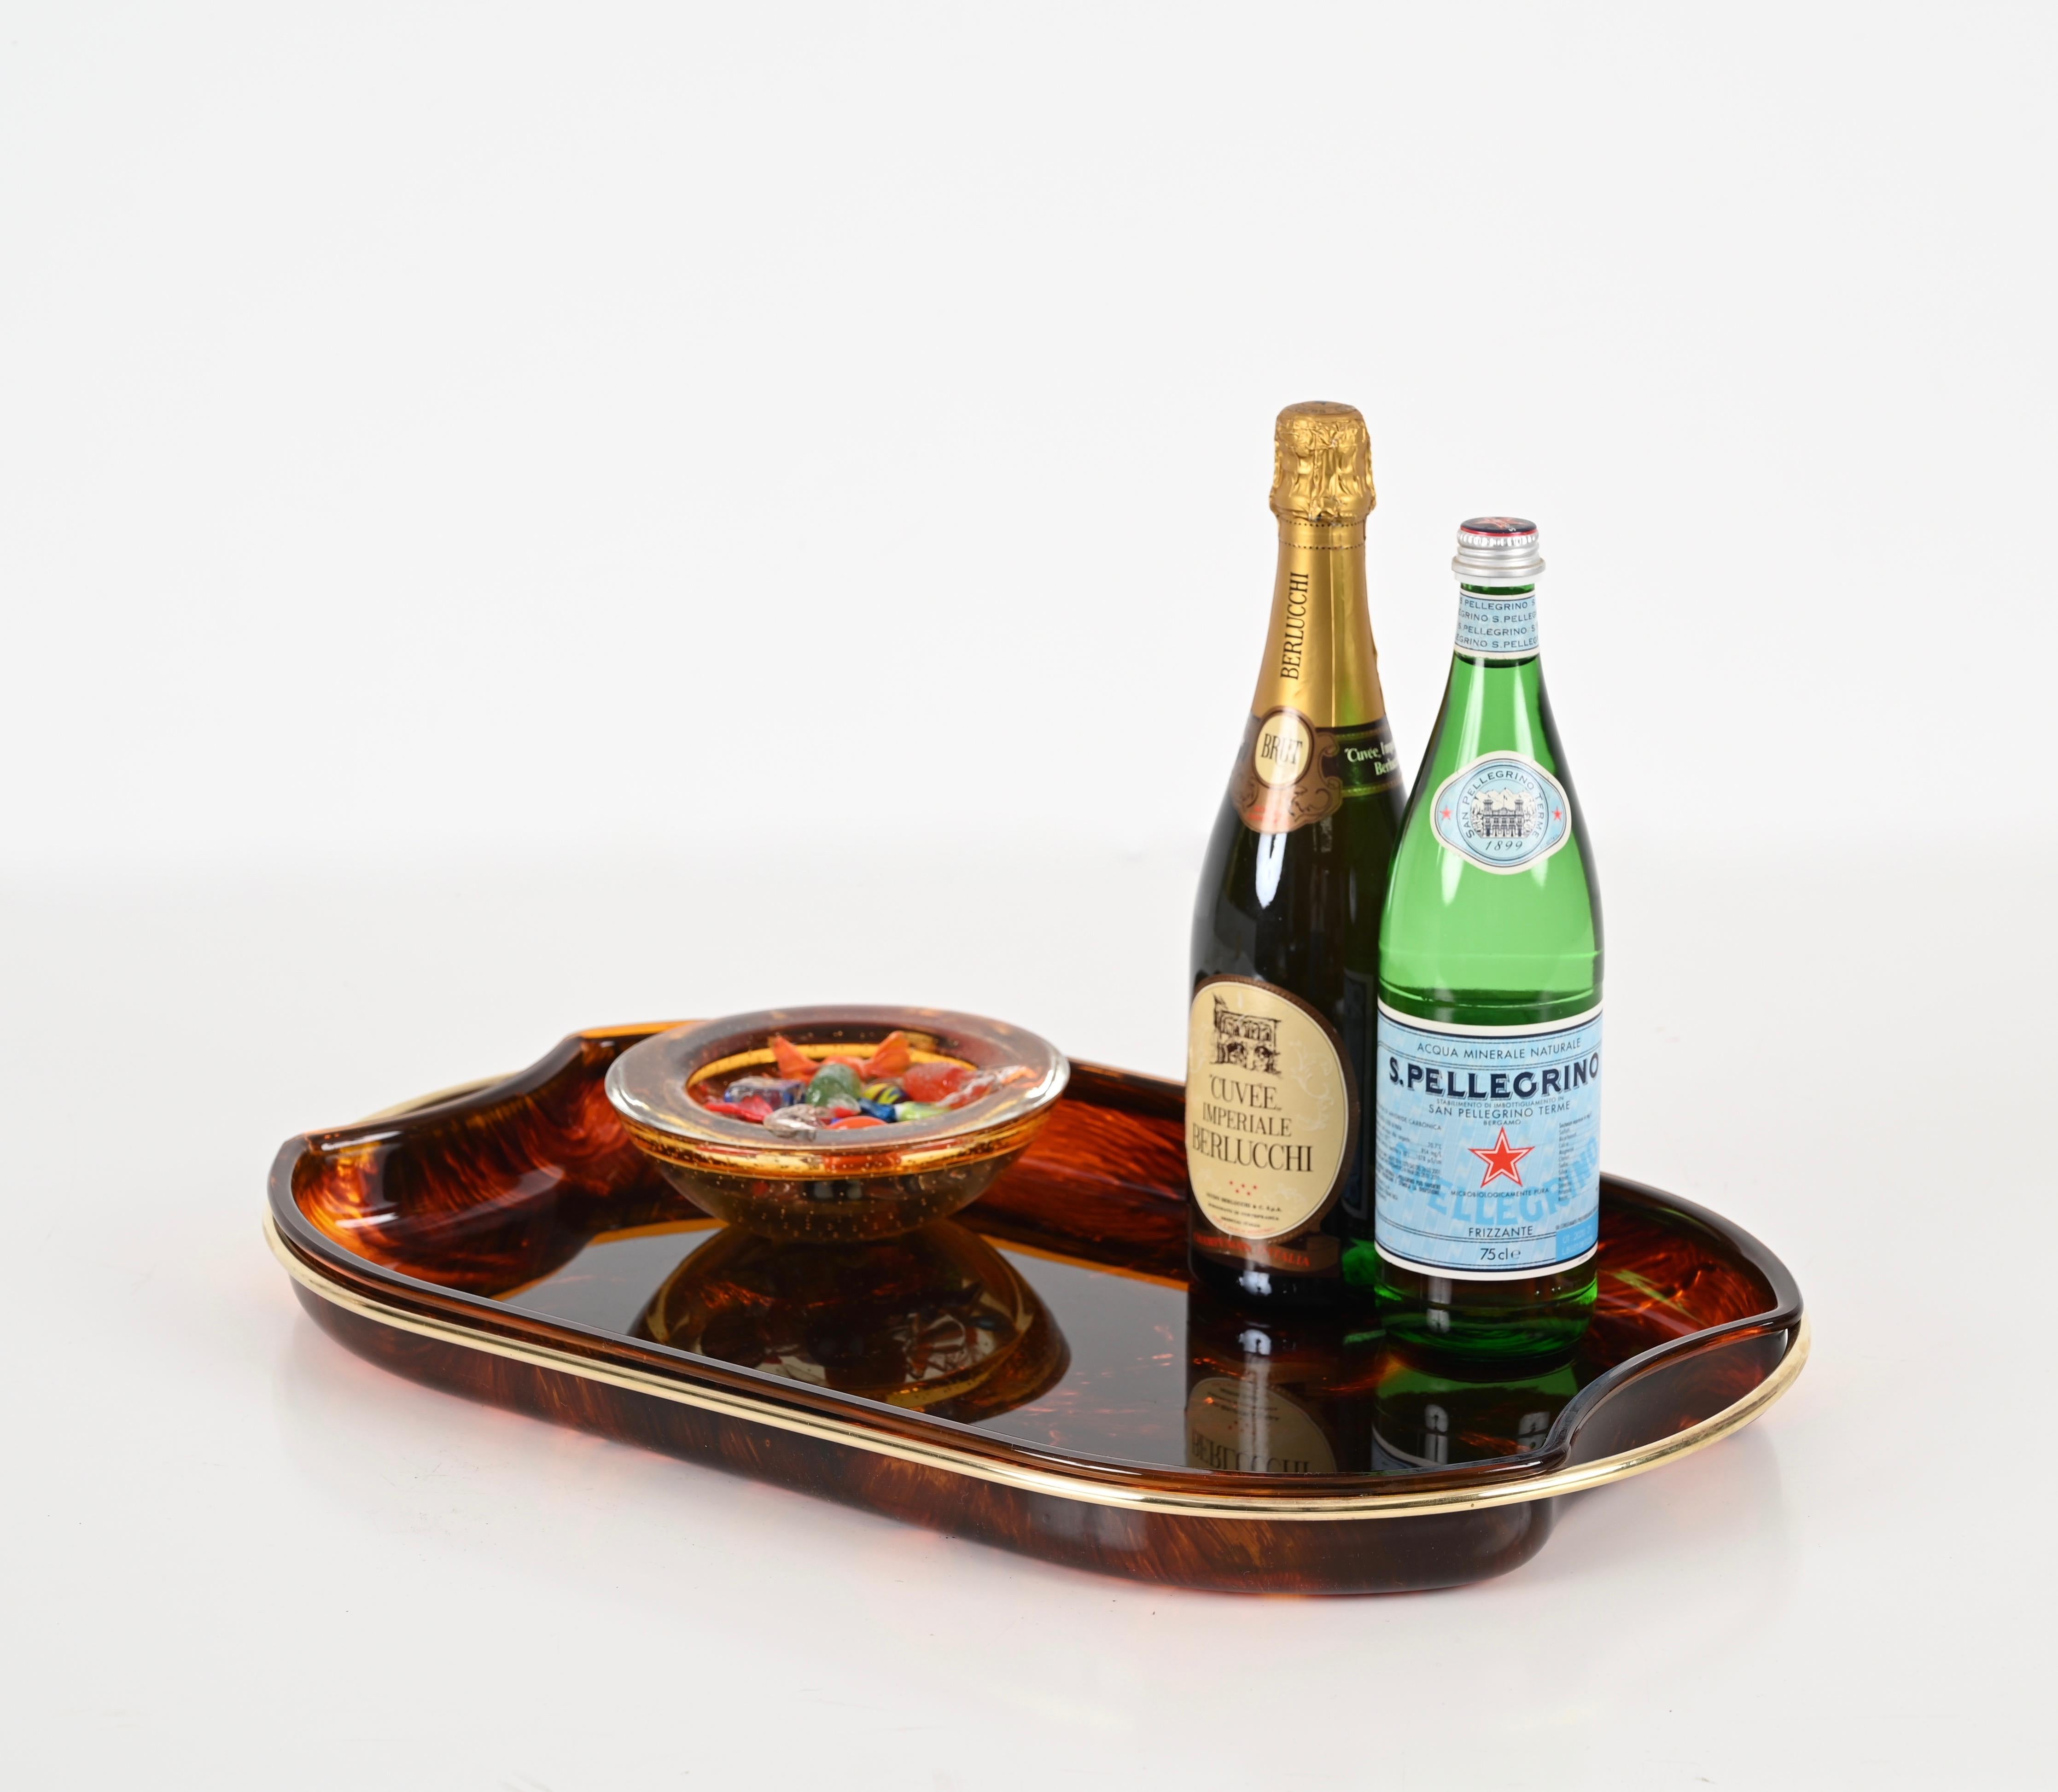 Wonderful and large Mid-Century tray in a gorgeous lucite with a tortoiseshell effect and brass.  This amazing piece was designed in Italy during the 1970s by Guzzini.

This charming serving tray is fantastic thanks to its materials and sinuous